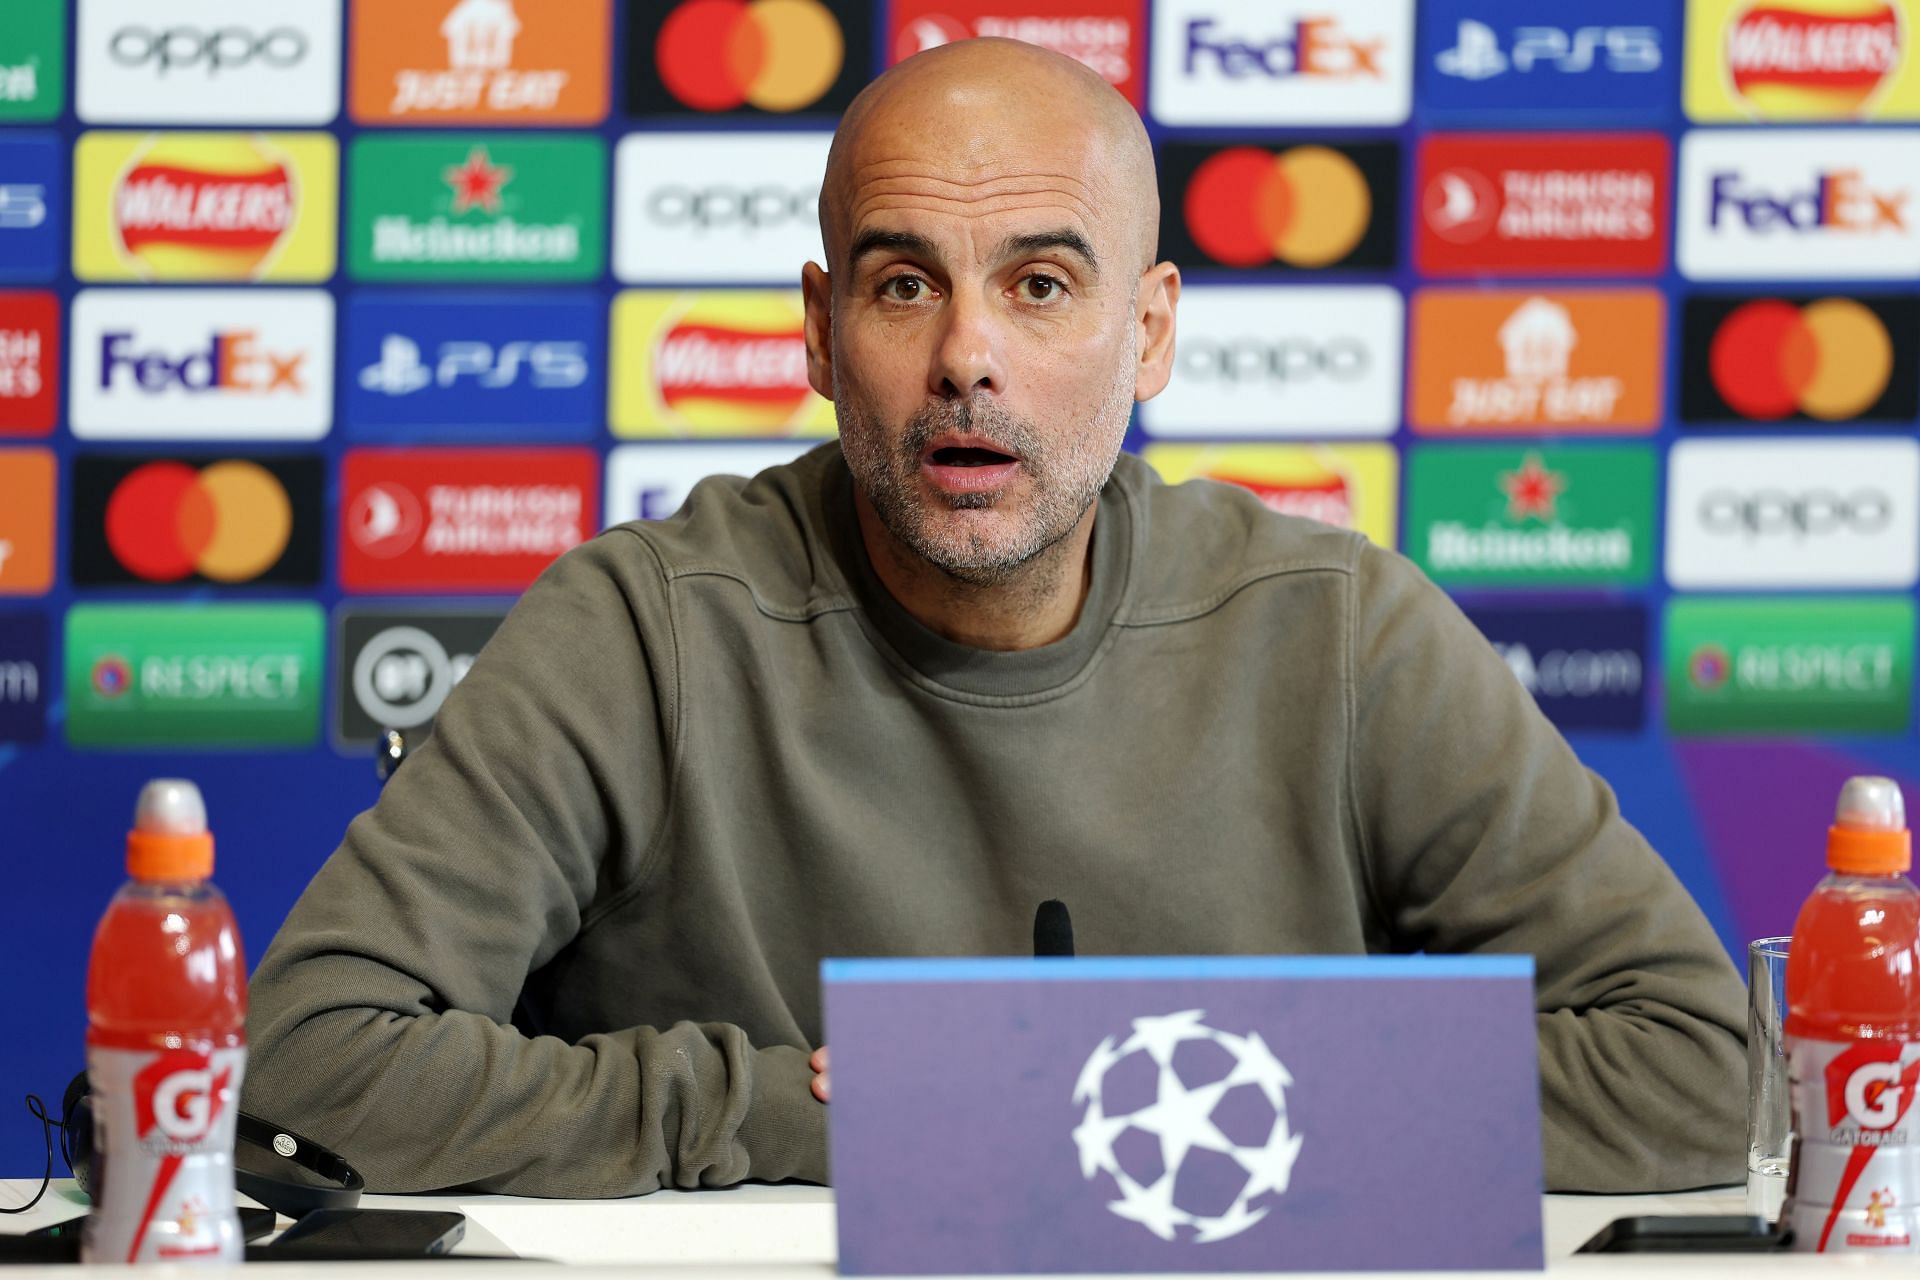 Pep Guardiola will look to get the better of Carlo Ancelotti on Tuesday.